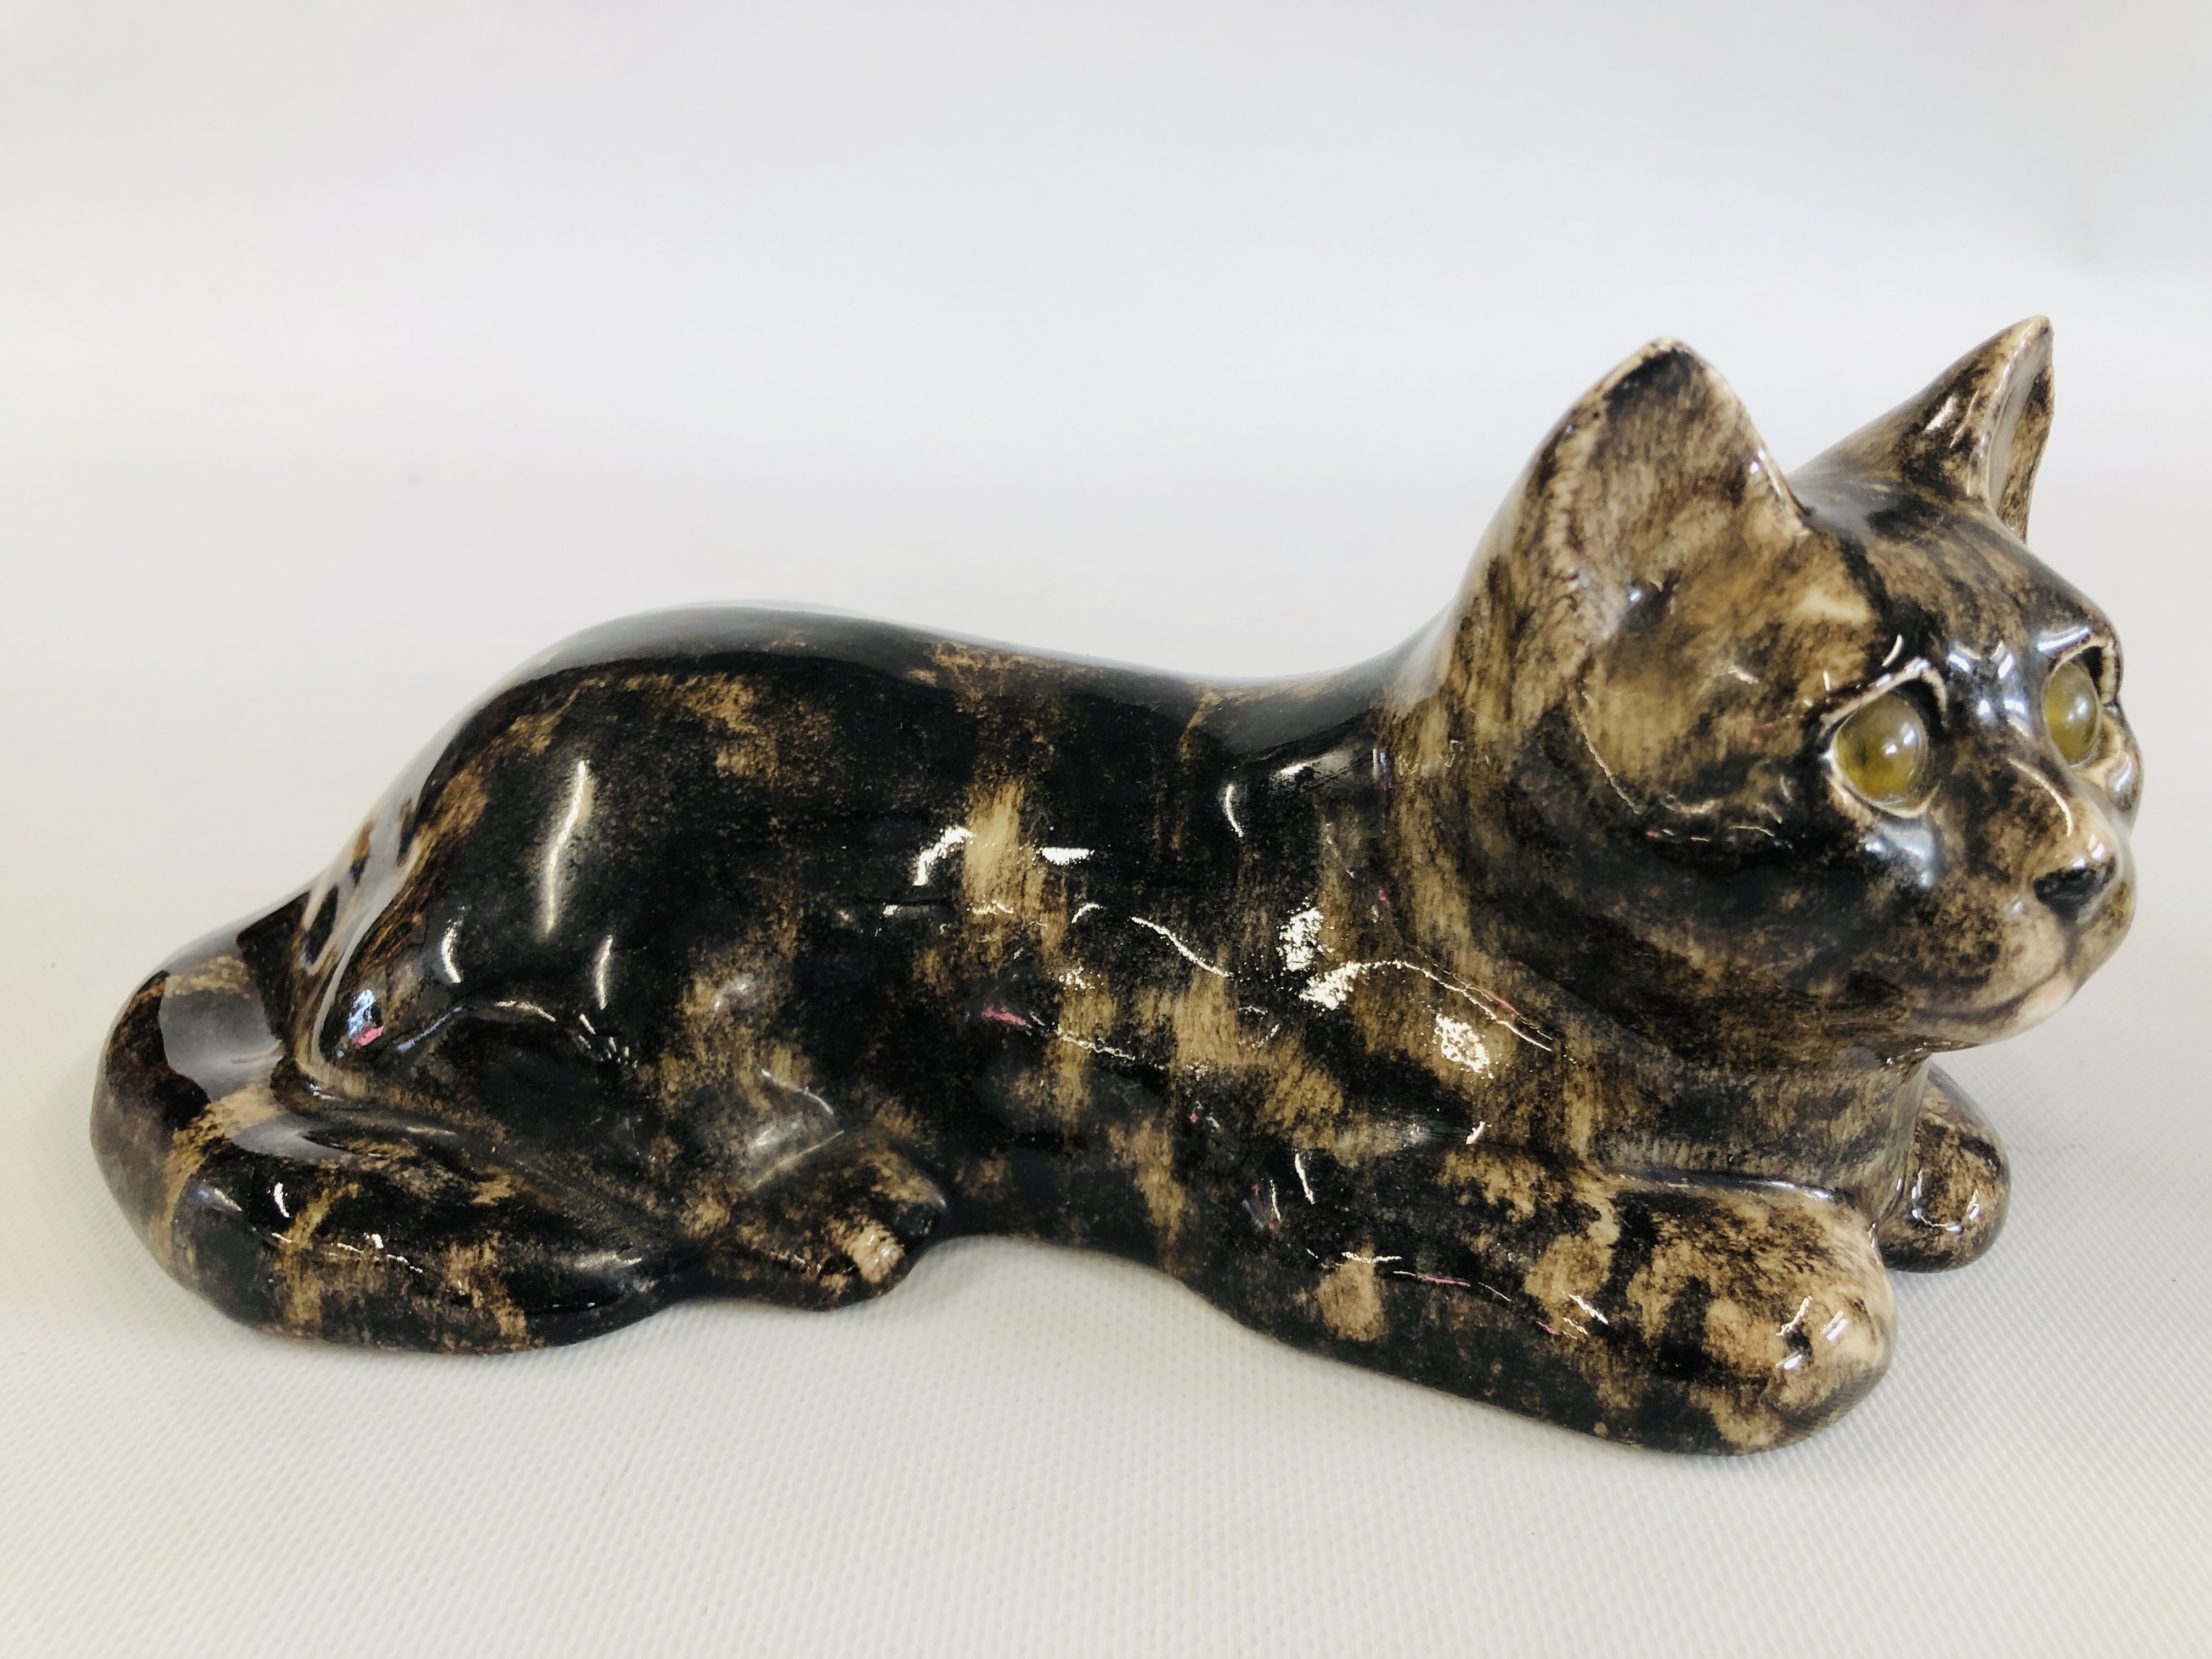 A WINSTANLEY POTTERY EXAMPLE OF A "SEATED" CAT BEARING SIGNATURE TO THE BASE, H 23. - Image 7 of 16